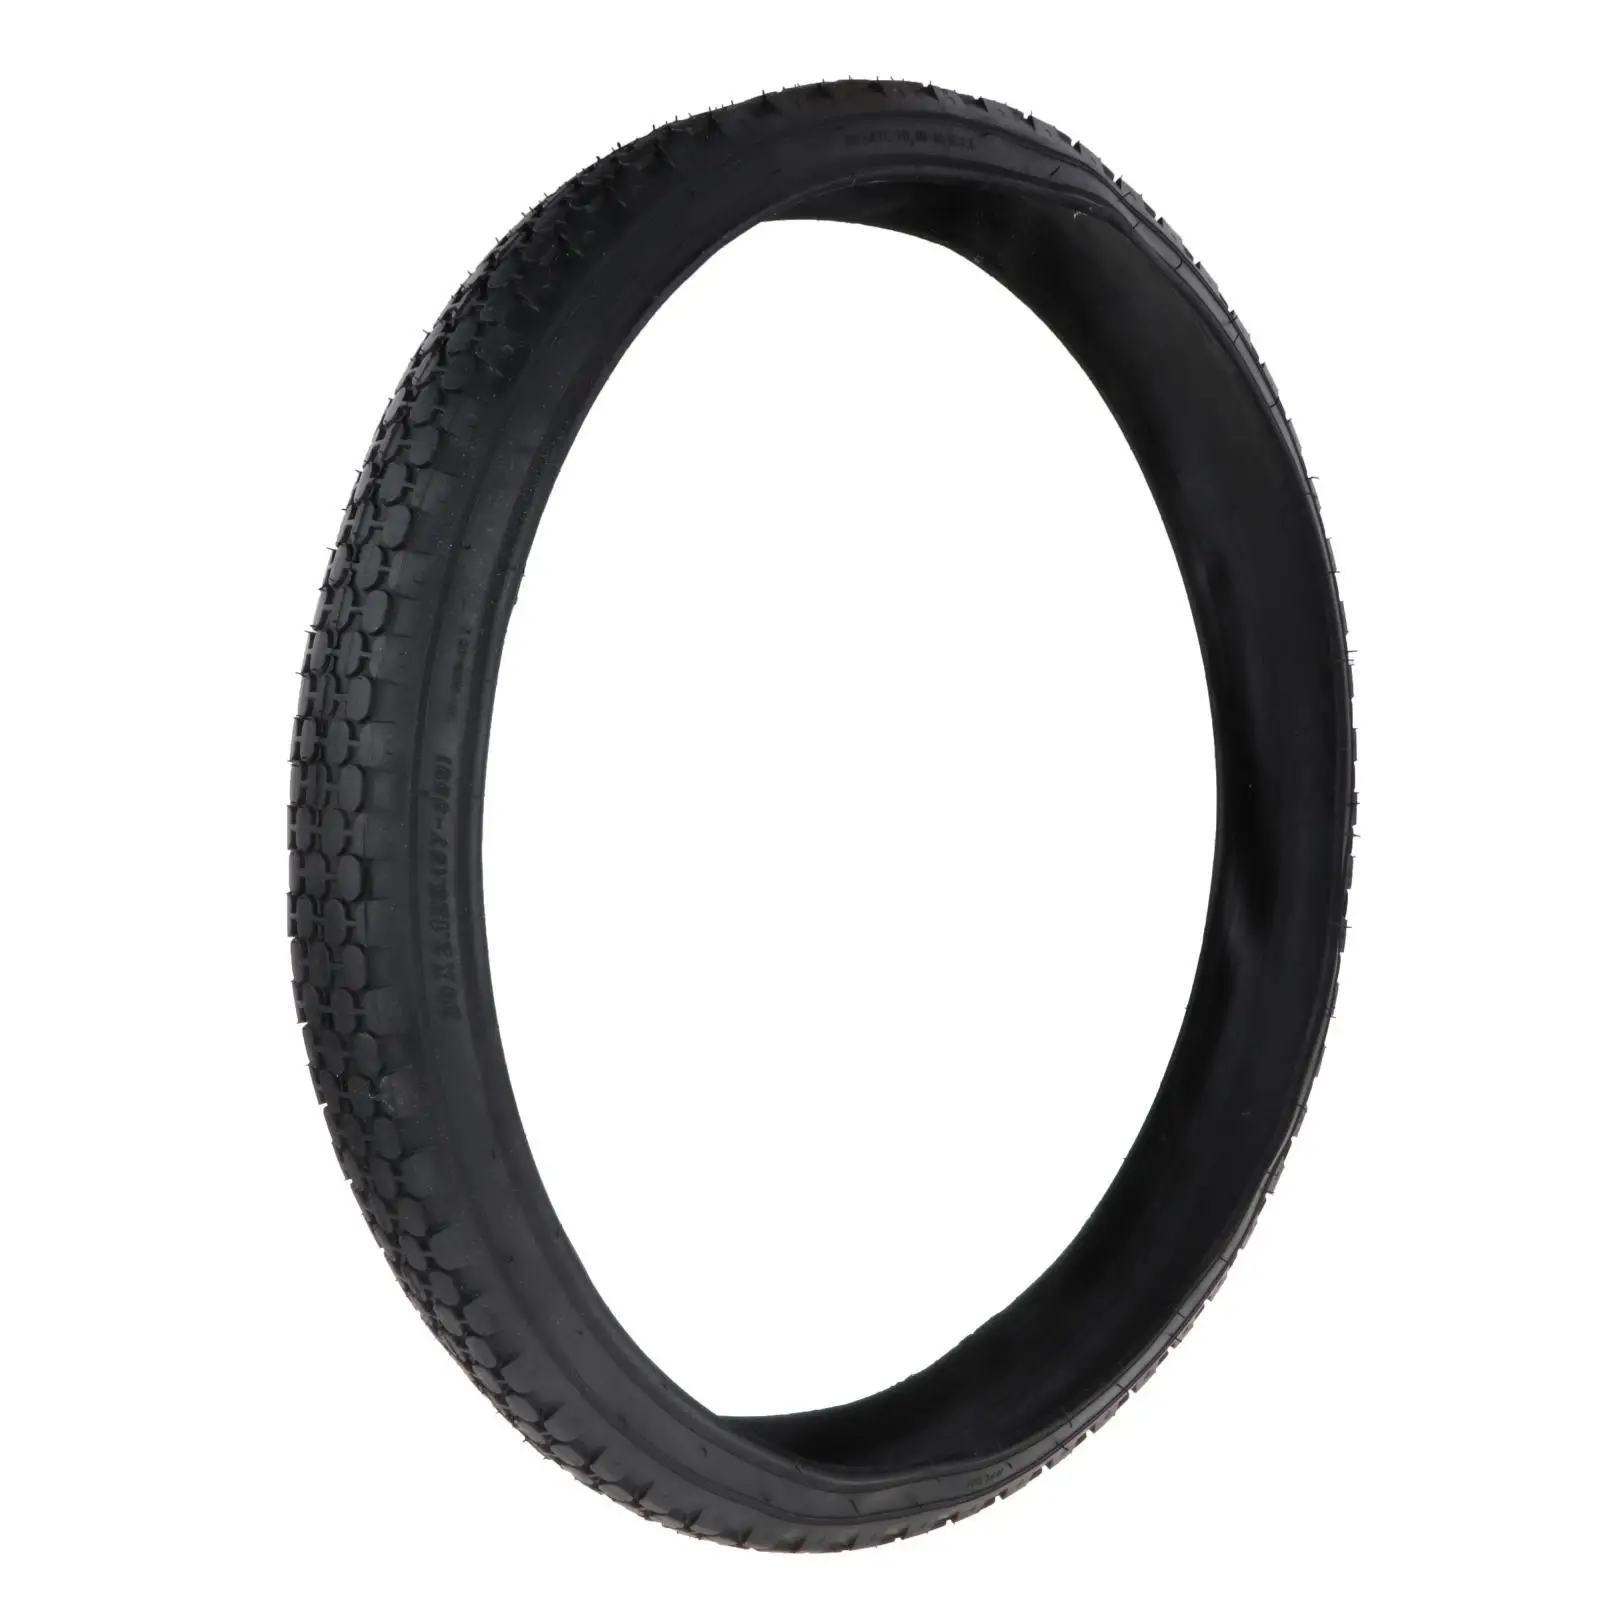 Bike Tyre 26x2.125 bicycle Solid Tire Puncture Resistant Replaces for Mountain Bicycle Folding Bike Road Bike